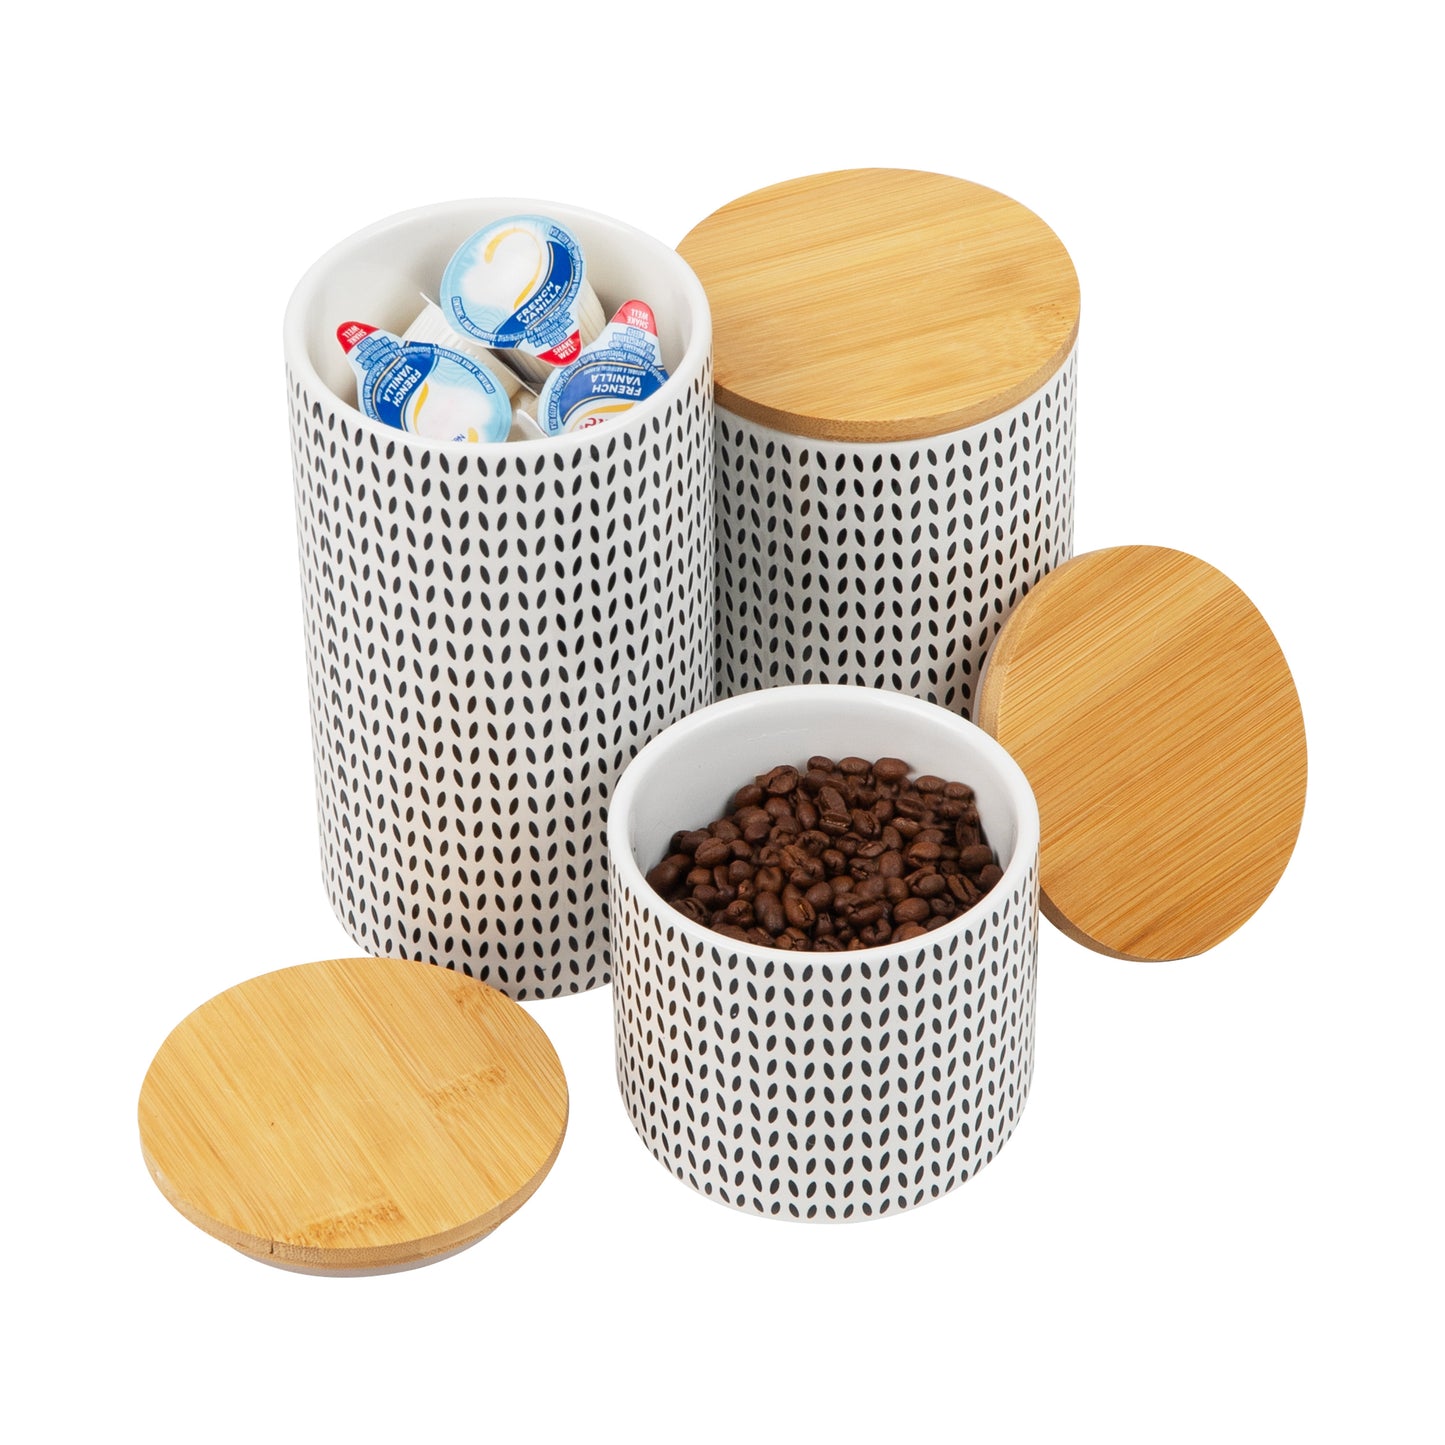 Mind Reader 3-Piece Canister Set, Small 14oz., Medium 24oz., and Large 23oz. Capacity, with Wooden Lids, Kitchen Storage, Countertop Organizer, Space Saver, 4"L x 4"W x 7"H, Black and White